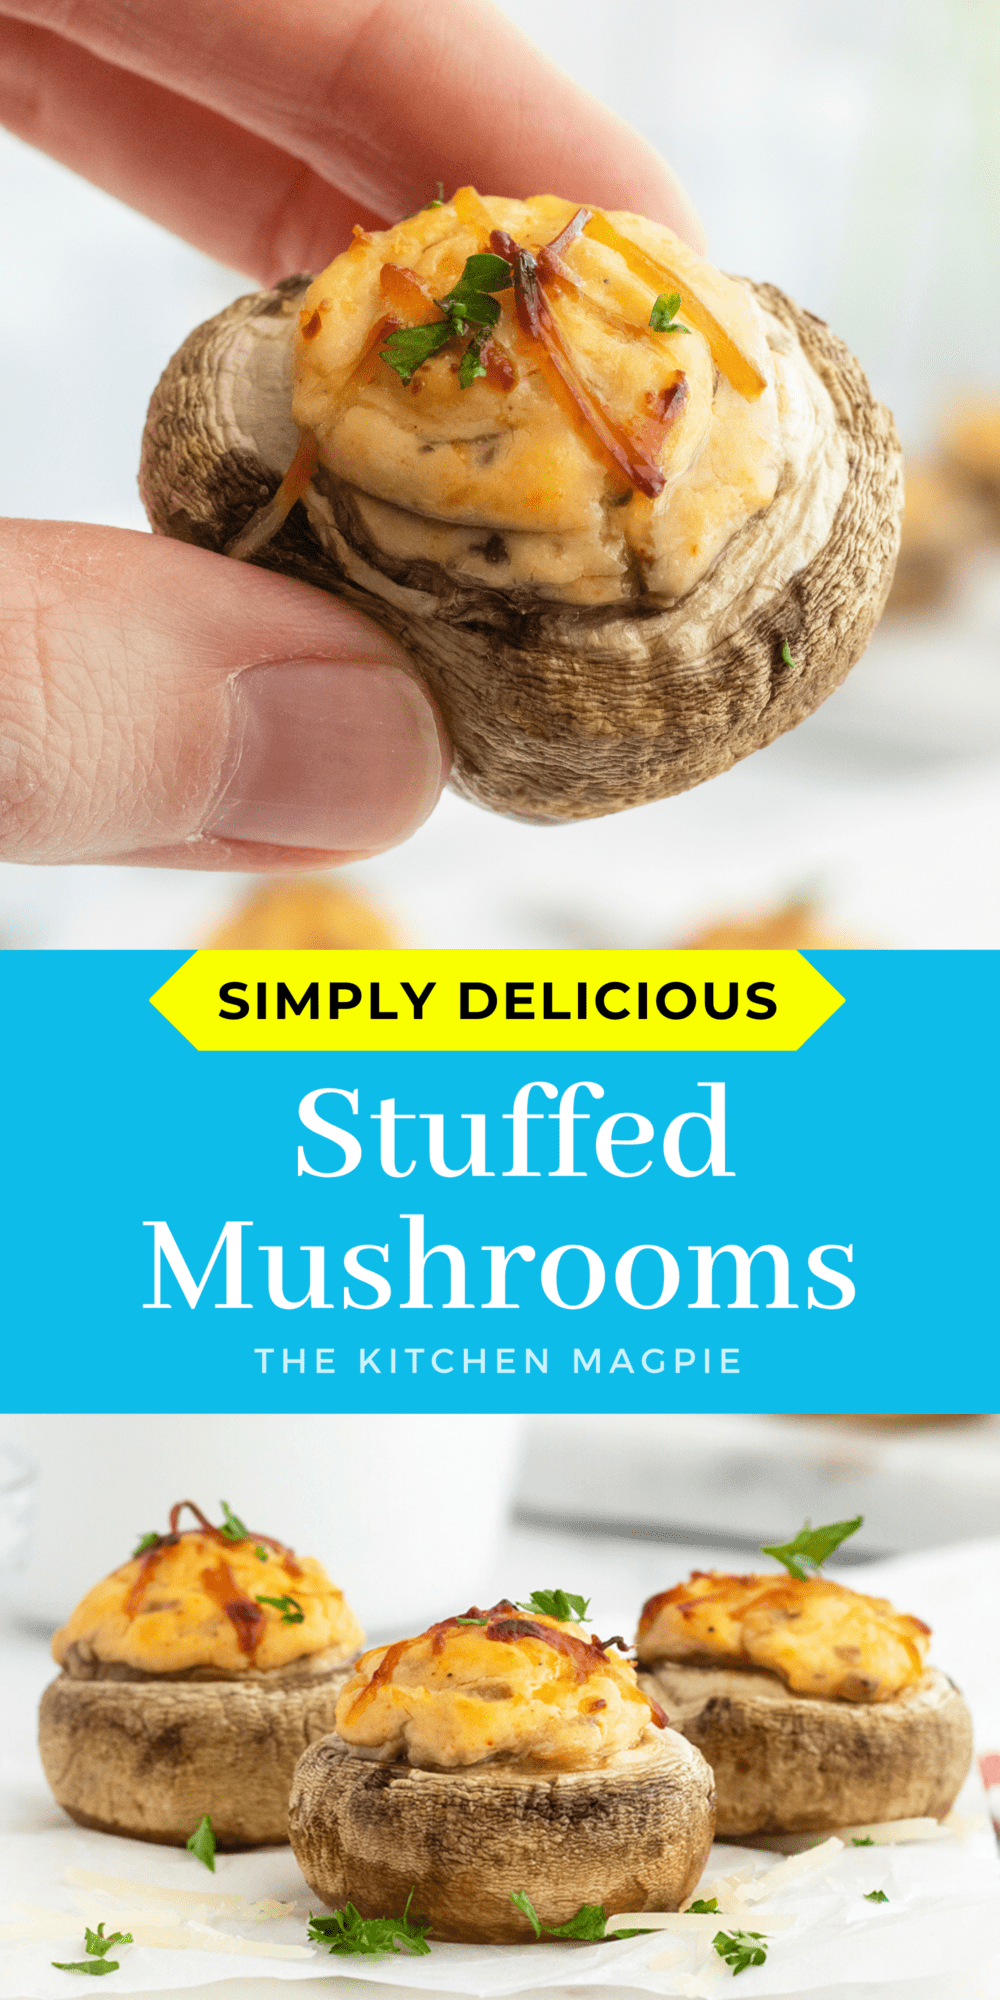 These Stuffed mushrooms are filled with creamy cheese, spices and garlic to make a perfect bite size appetizer!